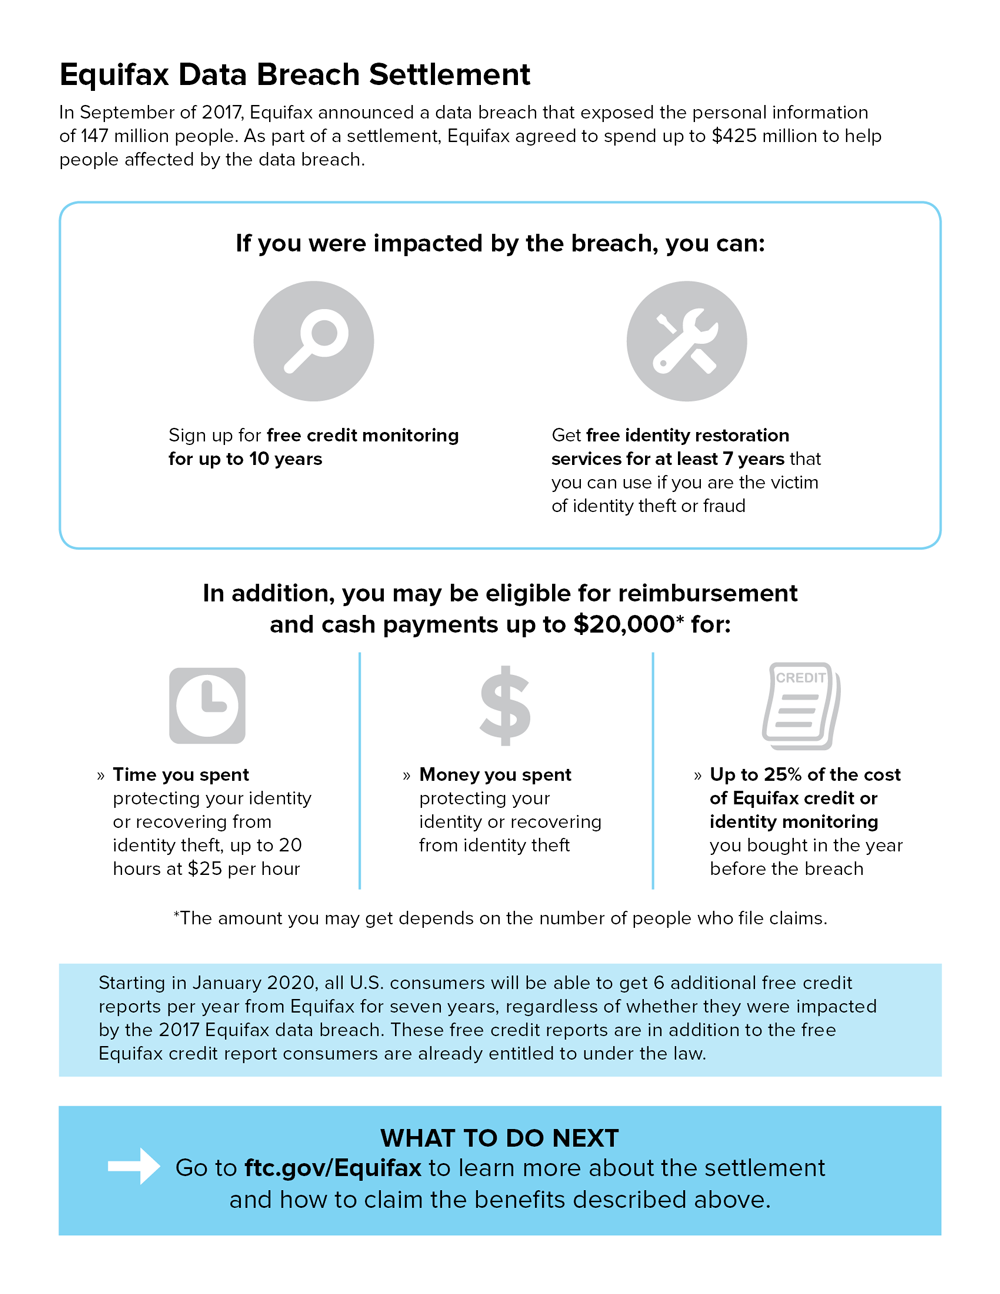 Image of Equifax Data Breach Settlement Infographic